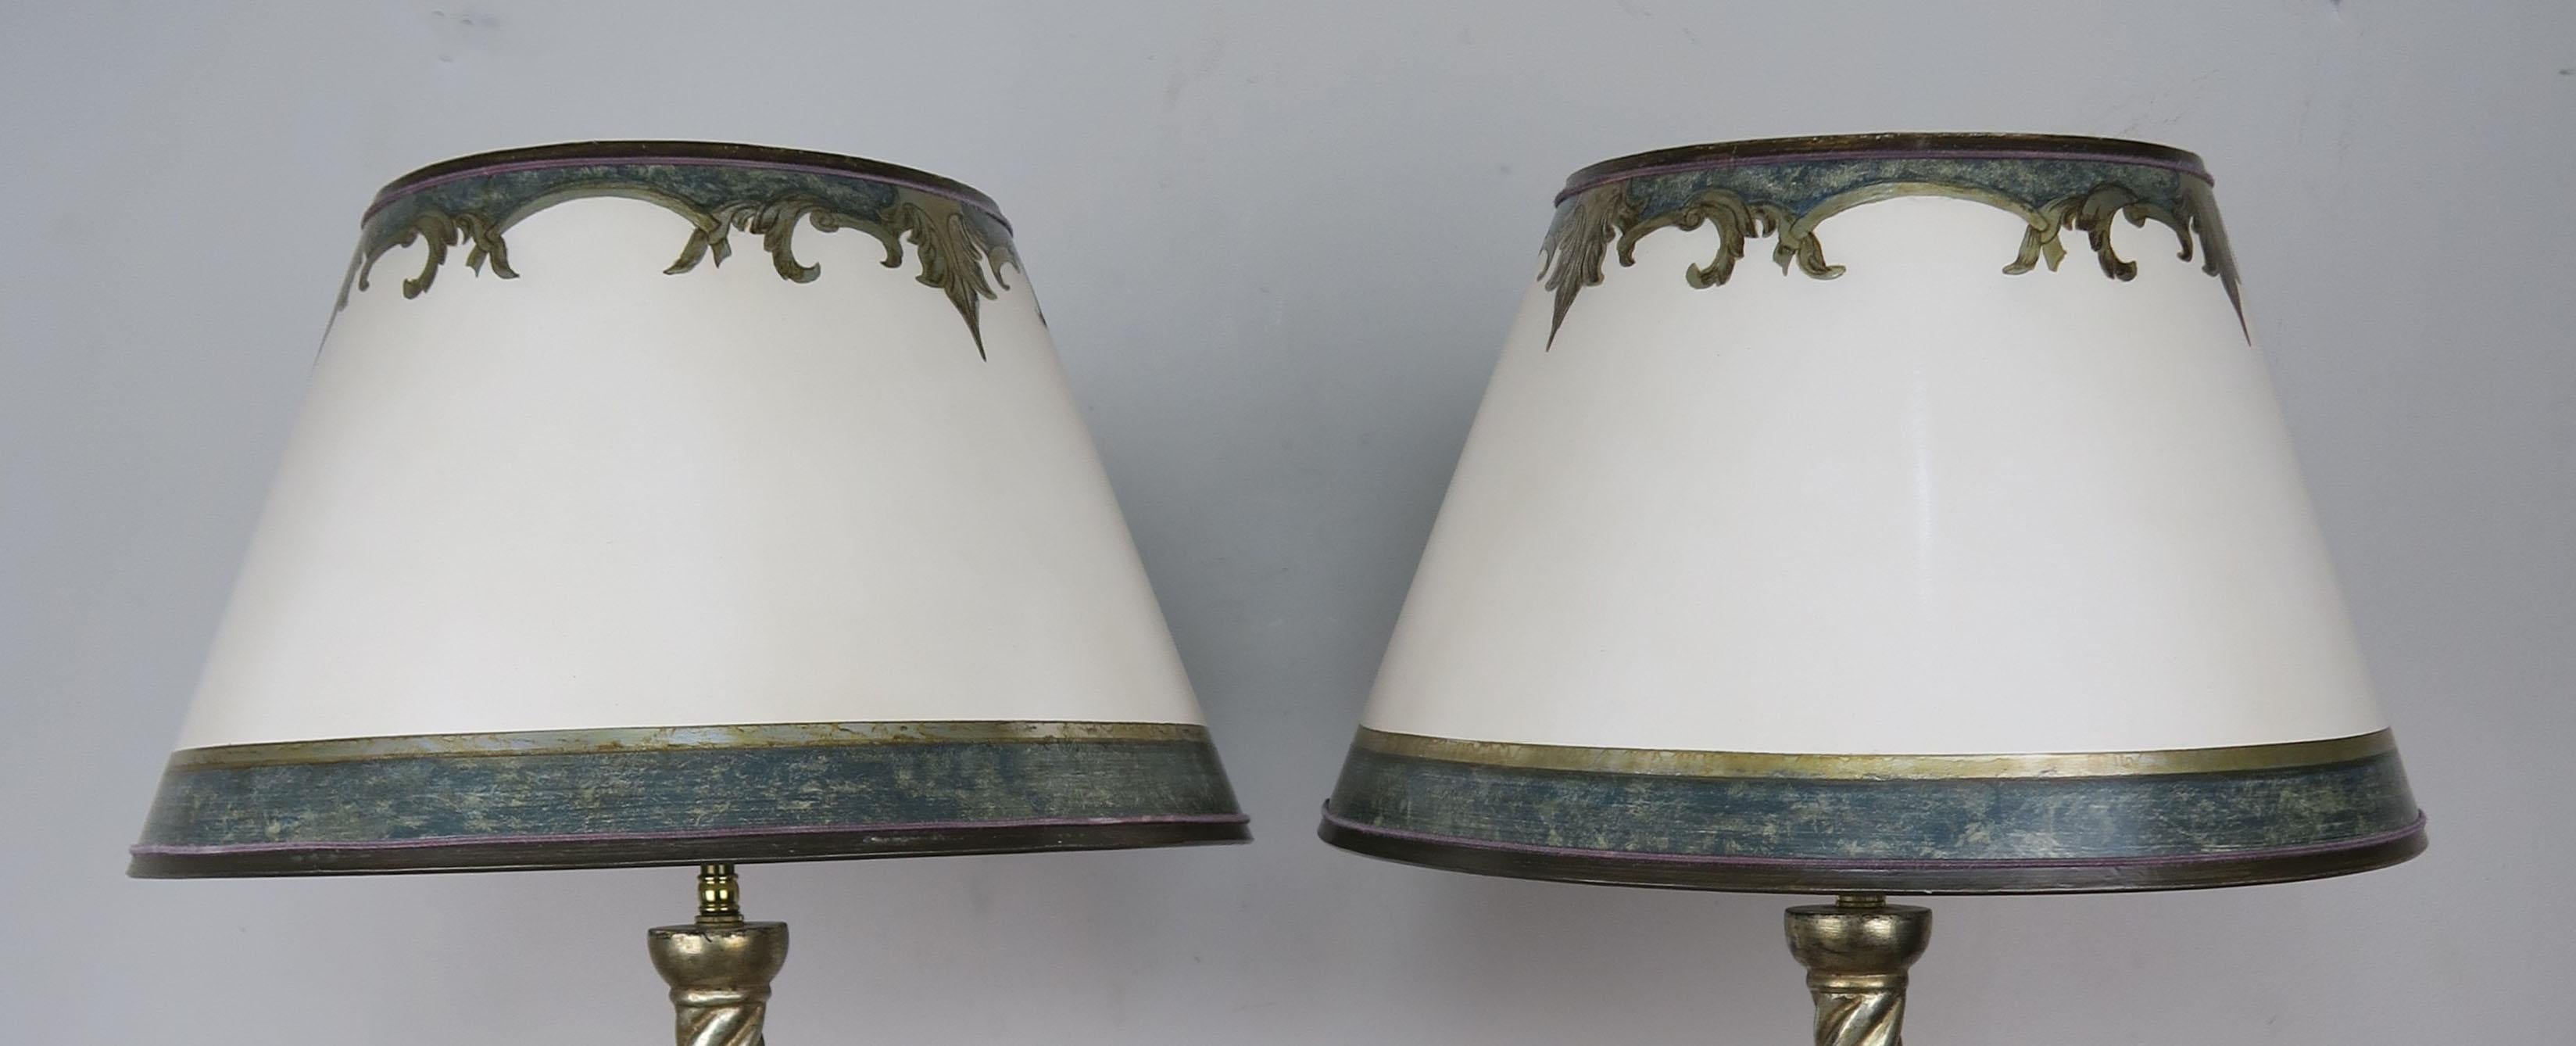 Pair of Carved Italian Borghese Lamps with Parchment Shades For Sale 3